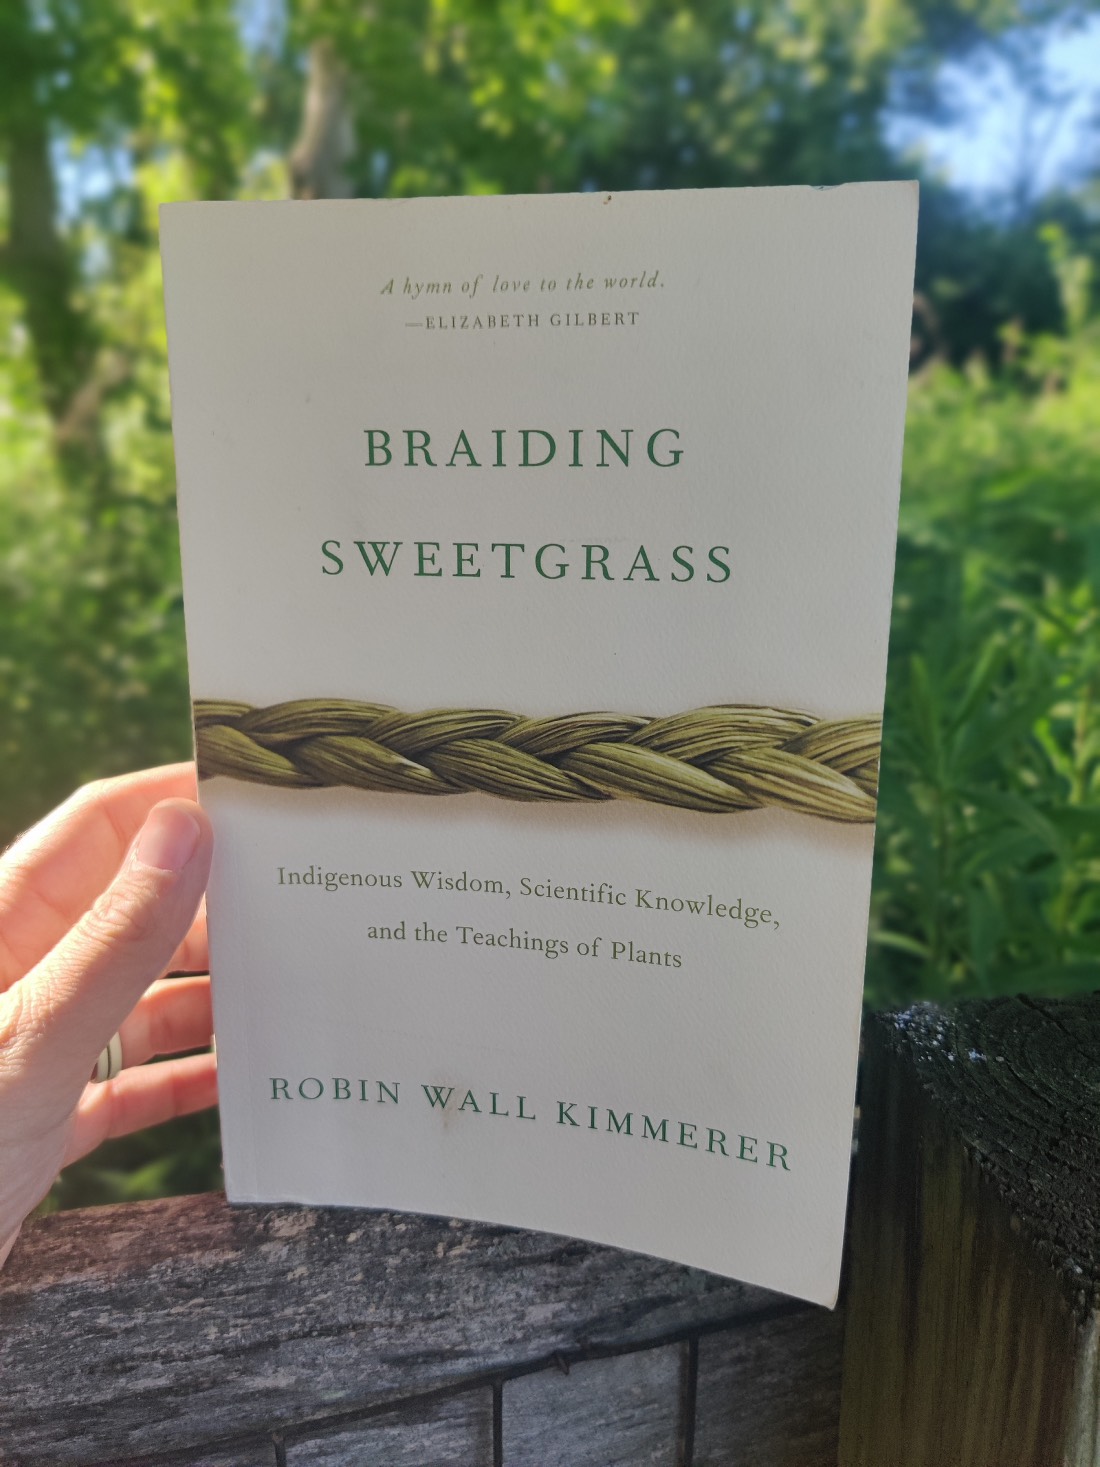 braiding sweetgrass cover held in the air outside